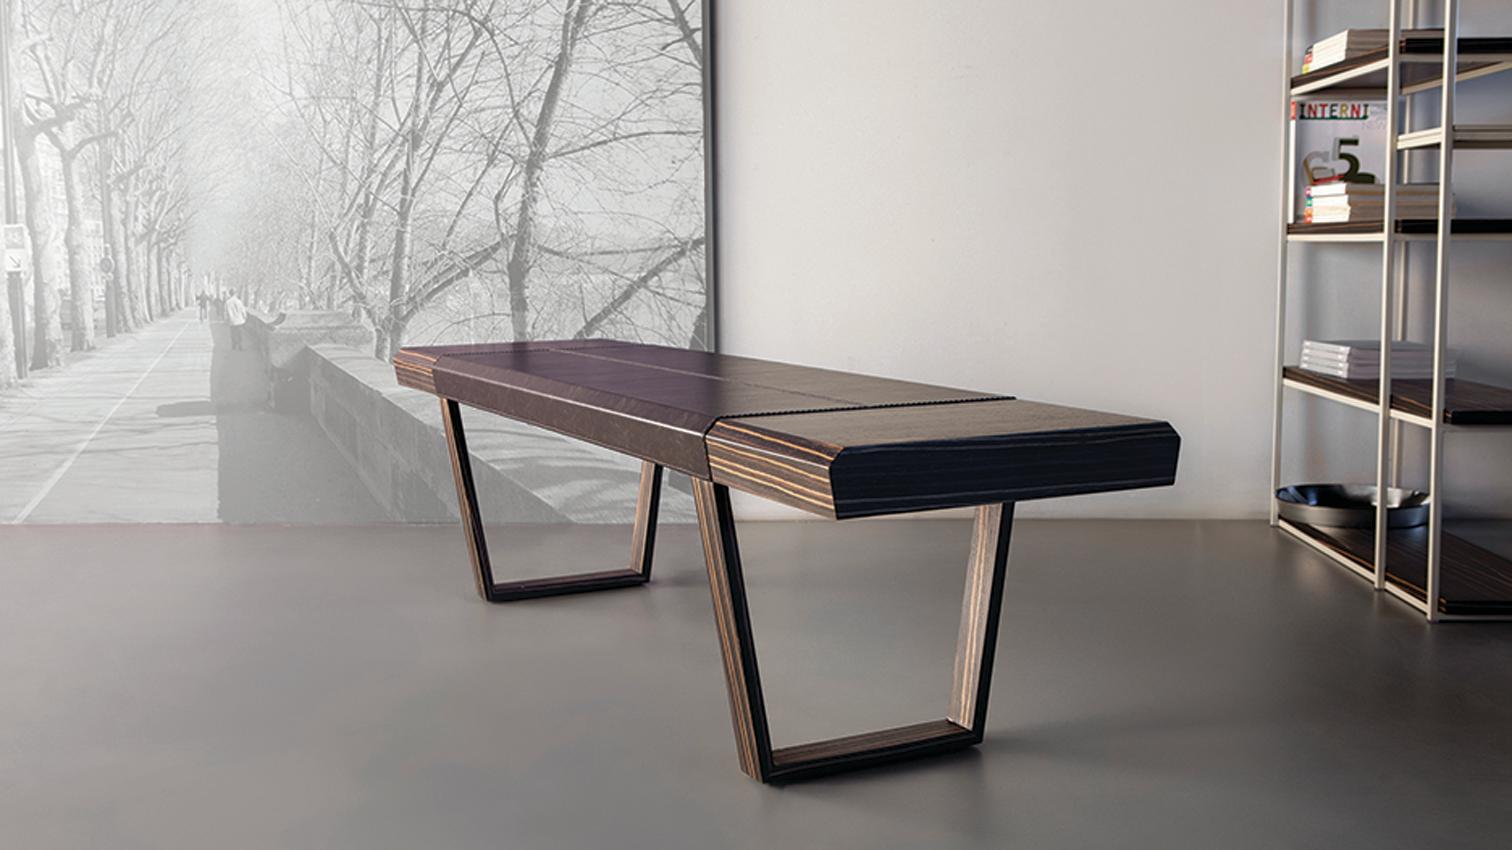 Velox Bench by Doimo Brasil
Dimensions: W 180 x D 48 x H 46 cm 
Materials: Leather


With the intention of providing good taste and personality, Doimo deciphers trends and follows the evolution of man and his space. To this end, it translates into